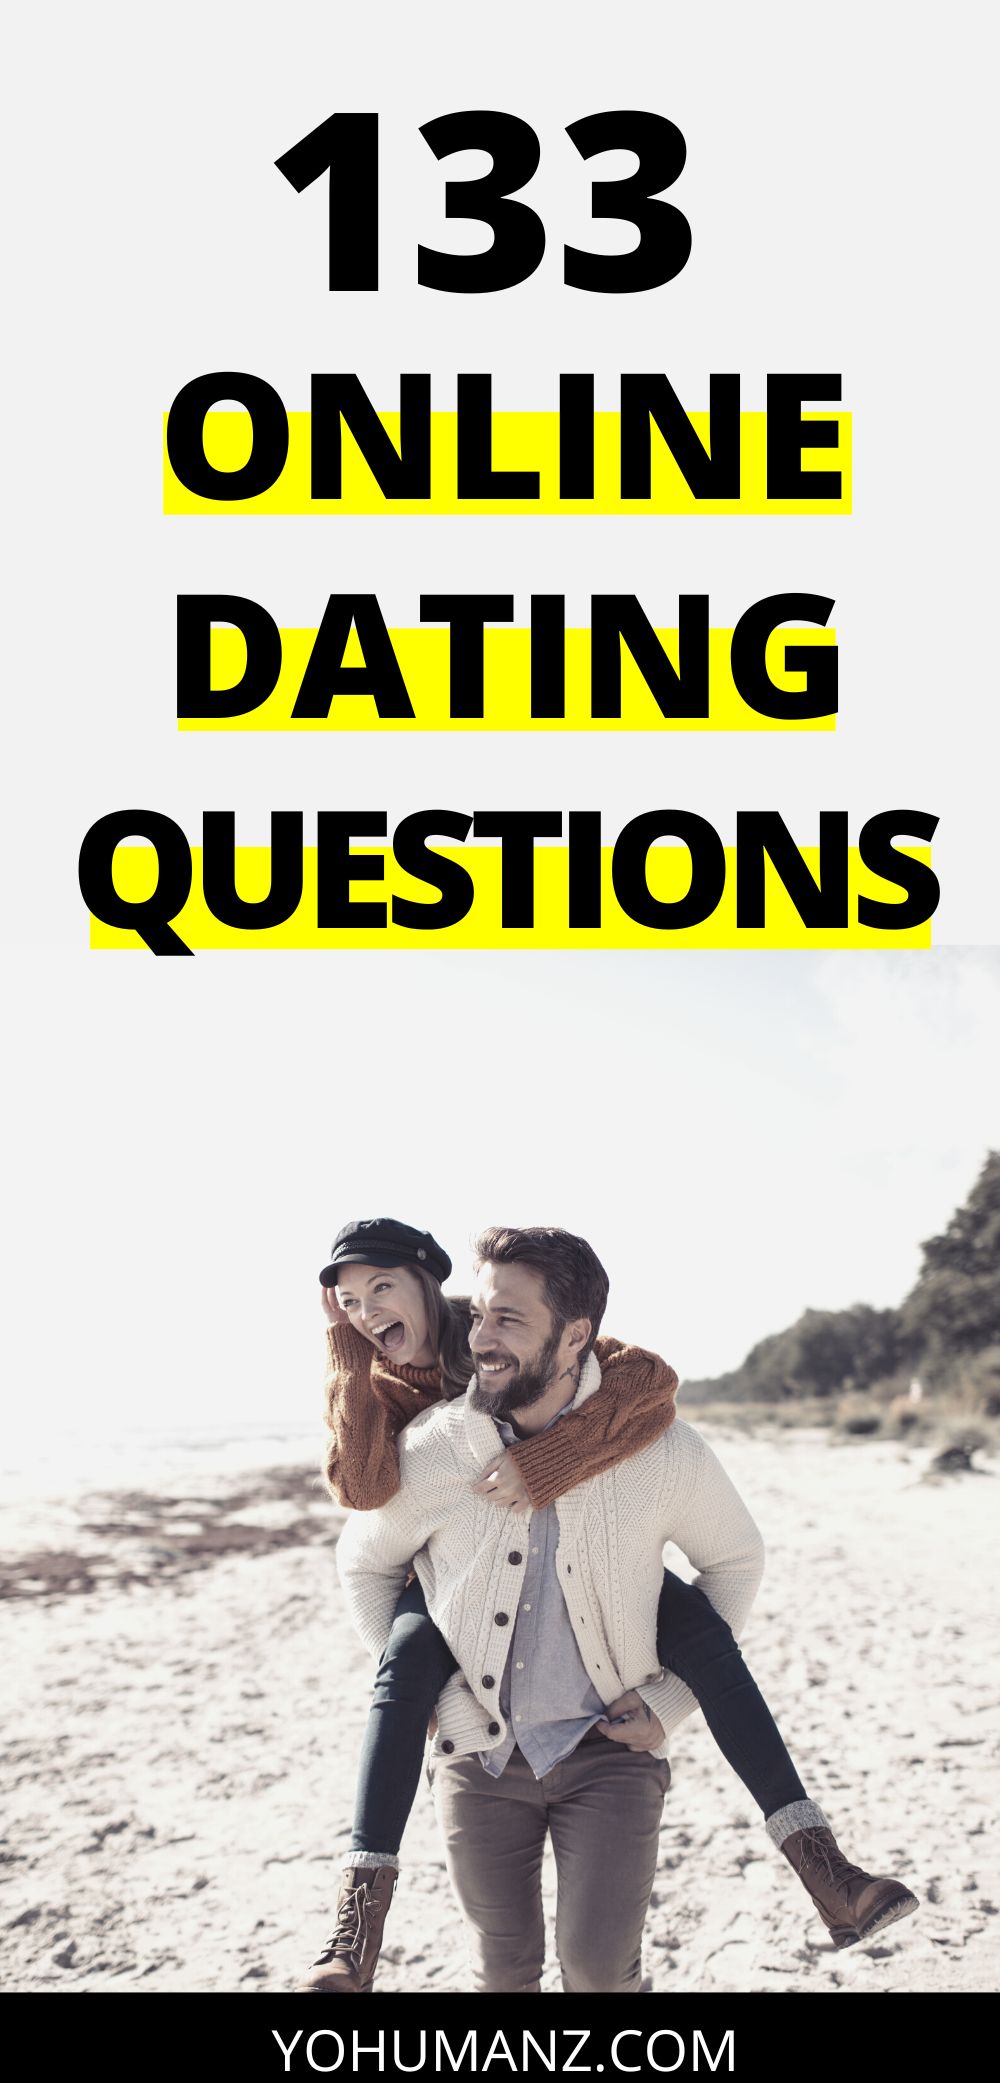 Online dating questions